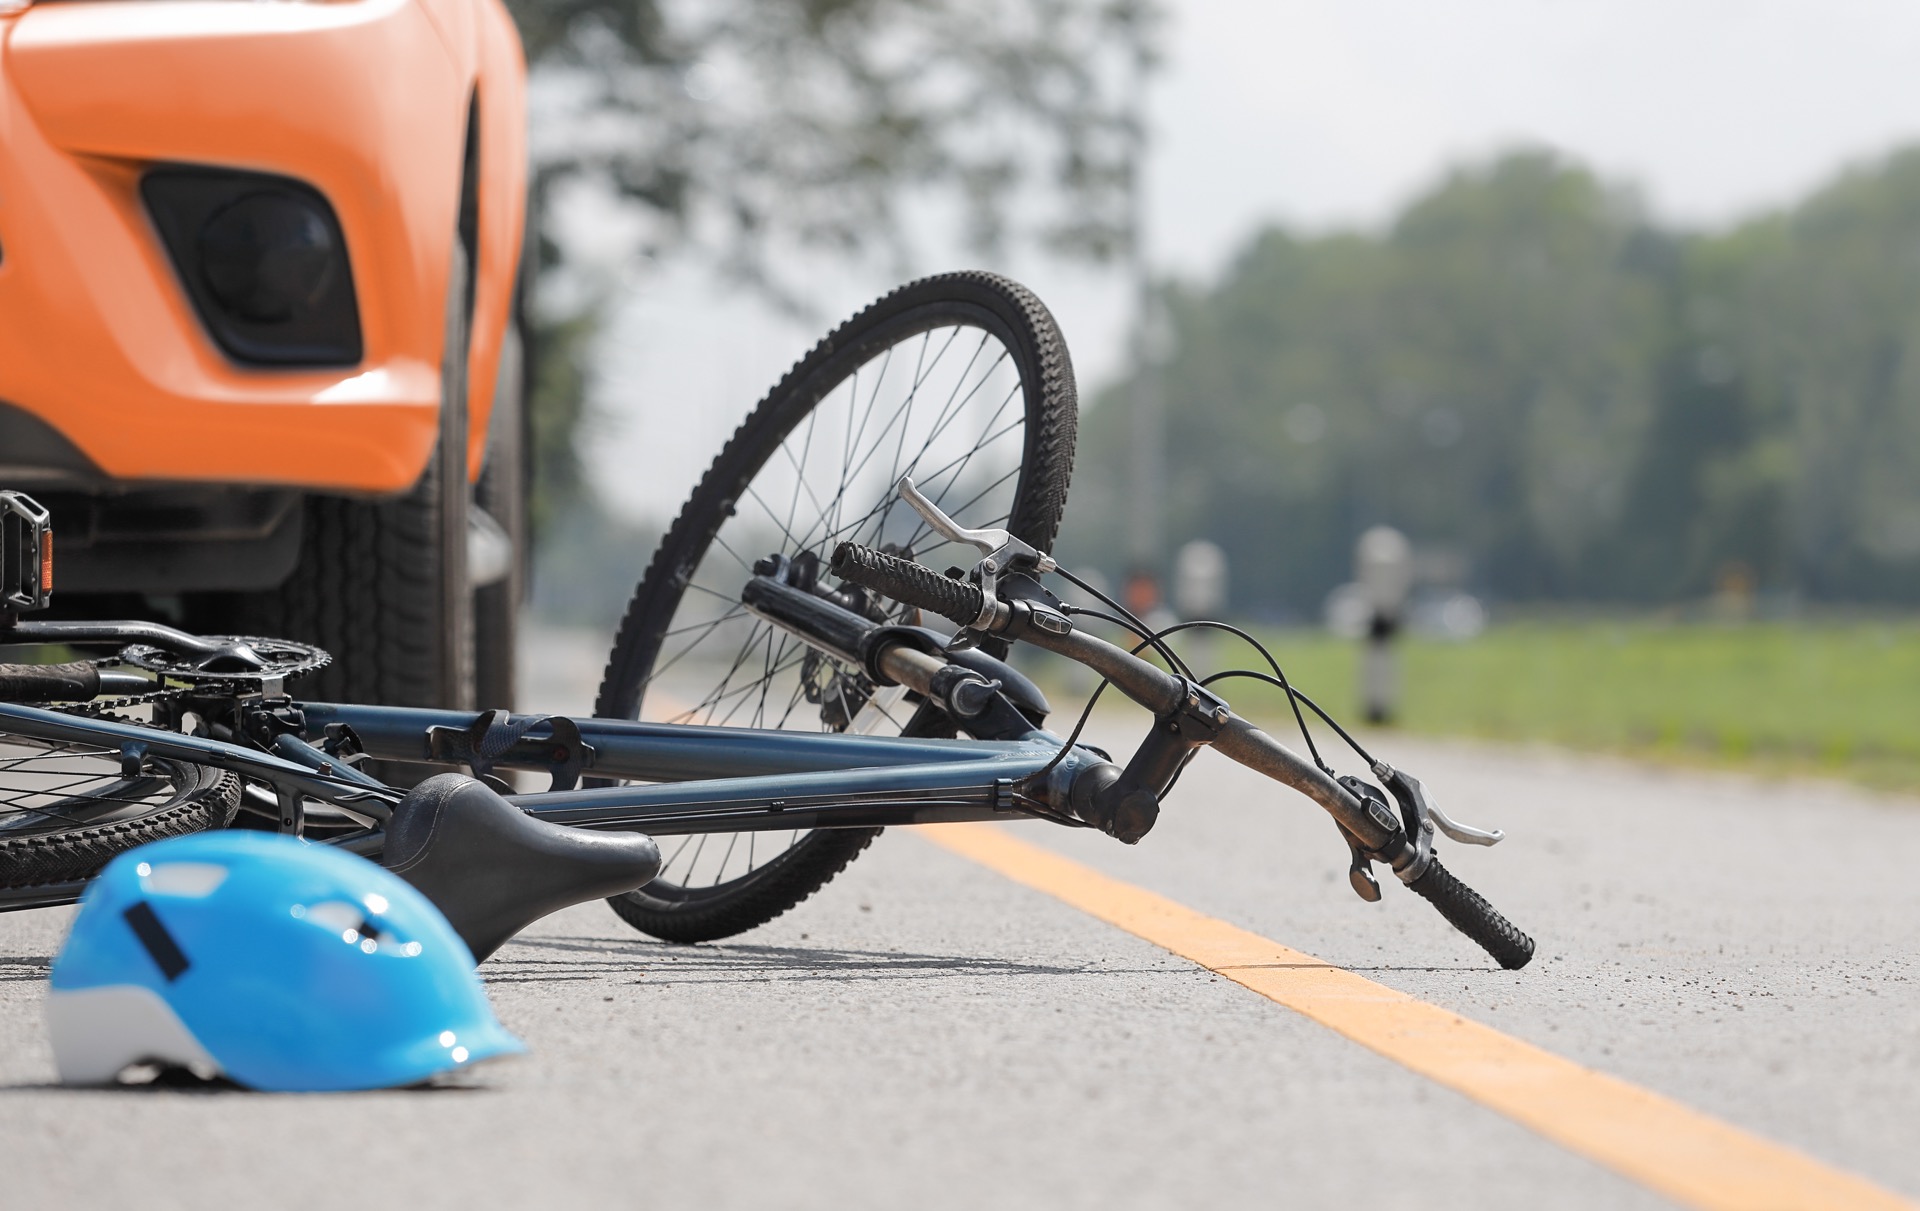 What Mistakes Should I Avoid After a Bicycle Accident?